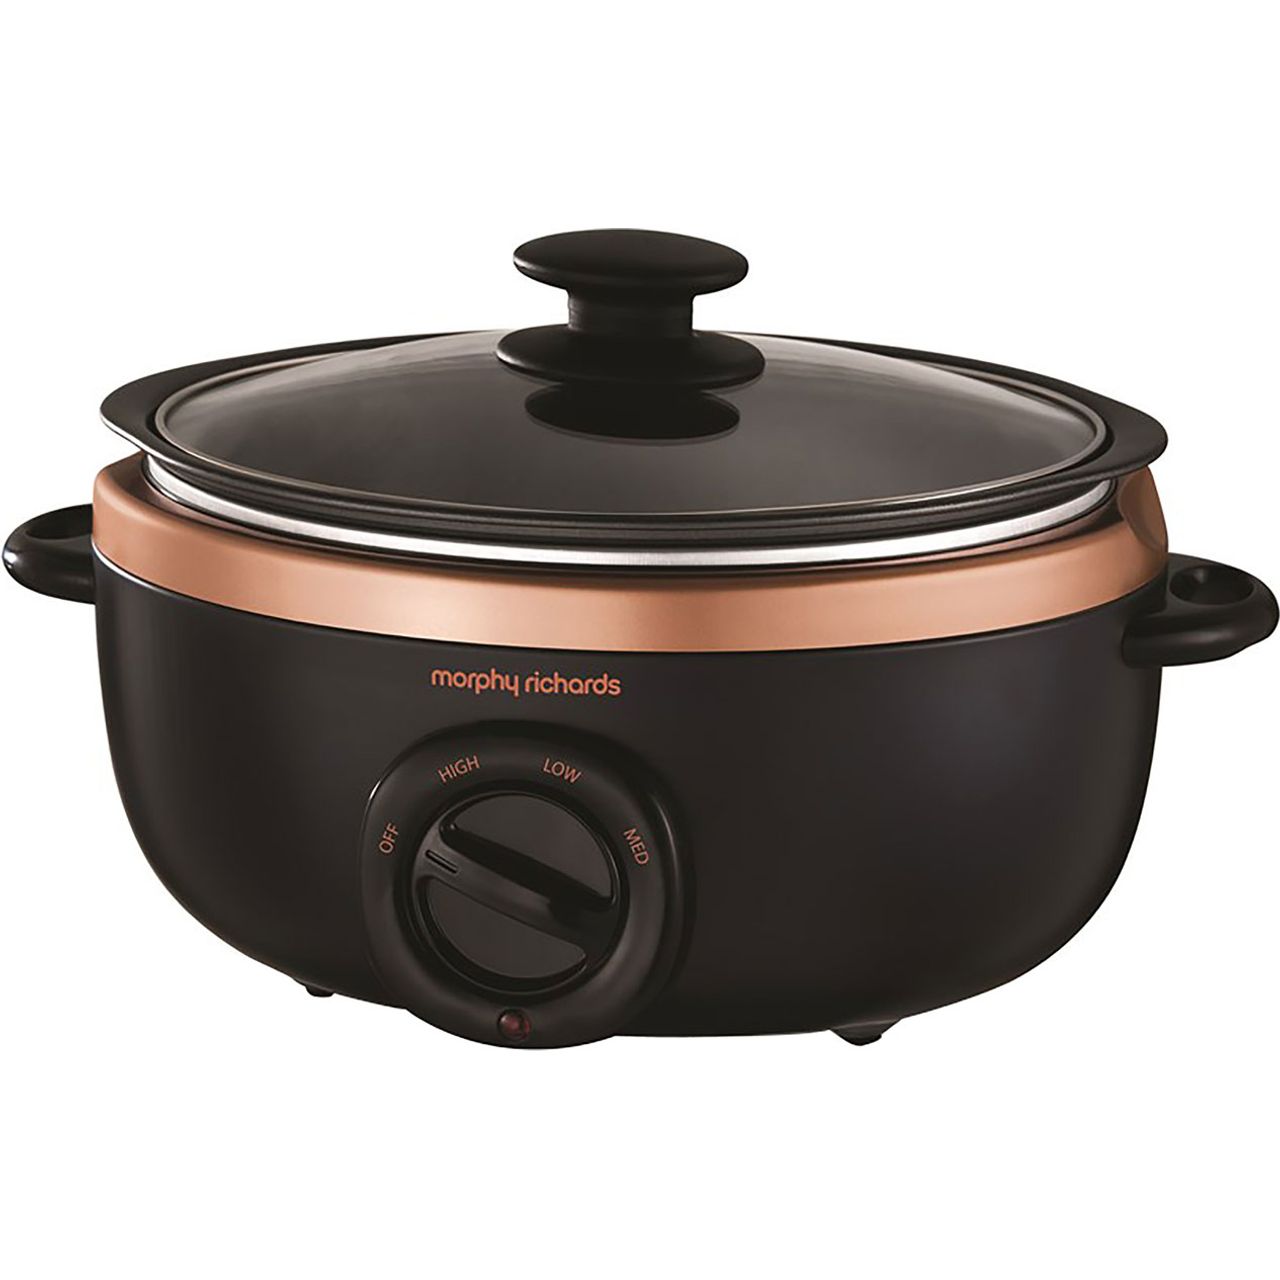 Morphy Richards Evoke Sear And Stew 460016 3.5 Litre Slow Cooker Review